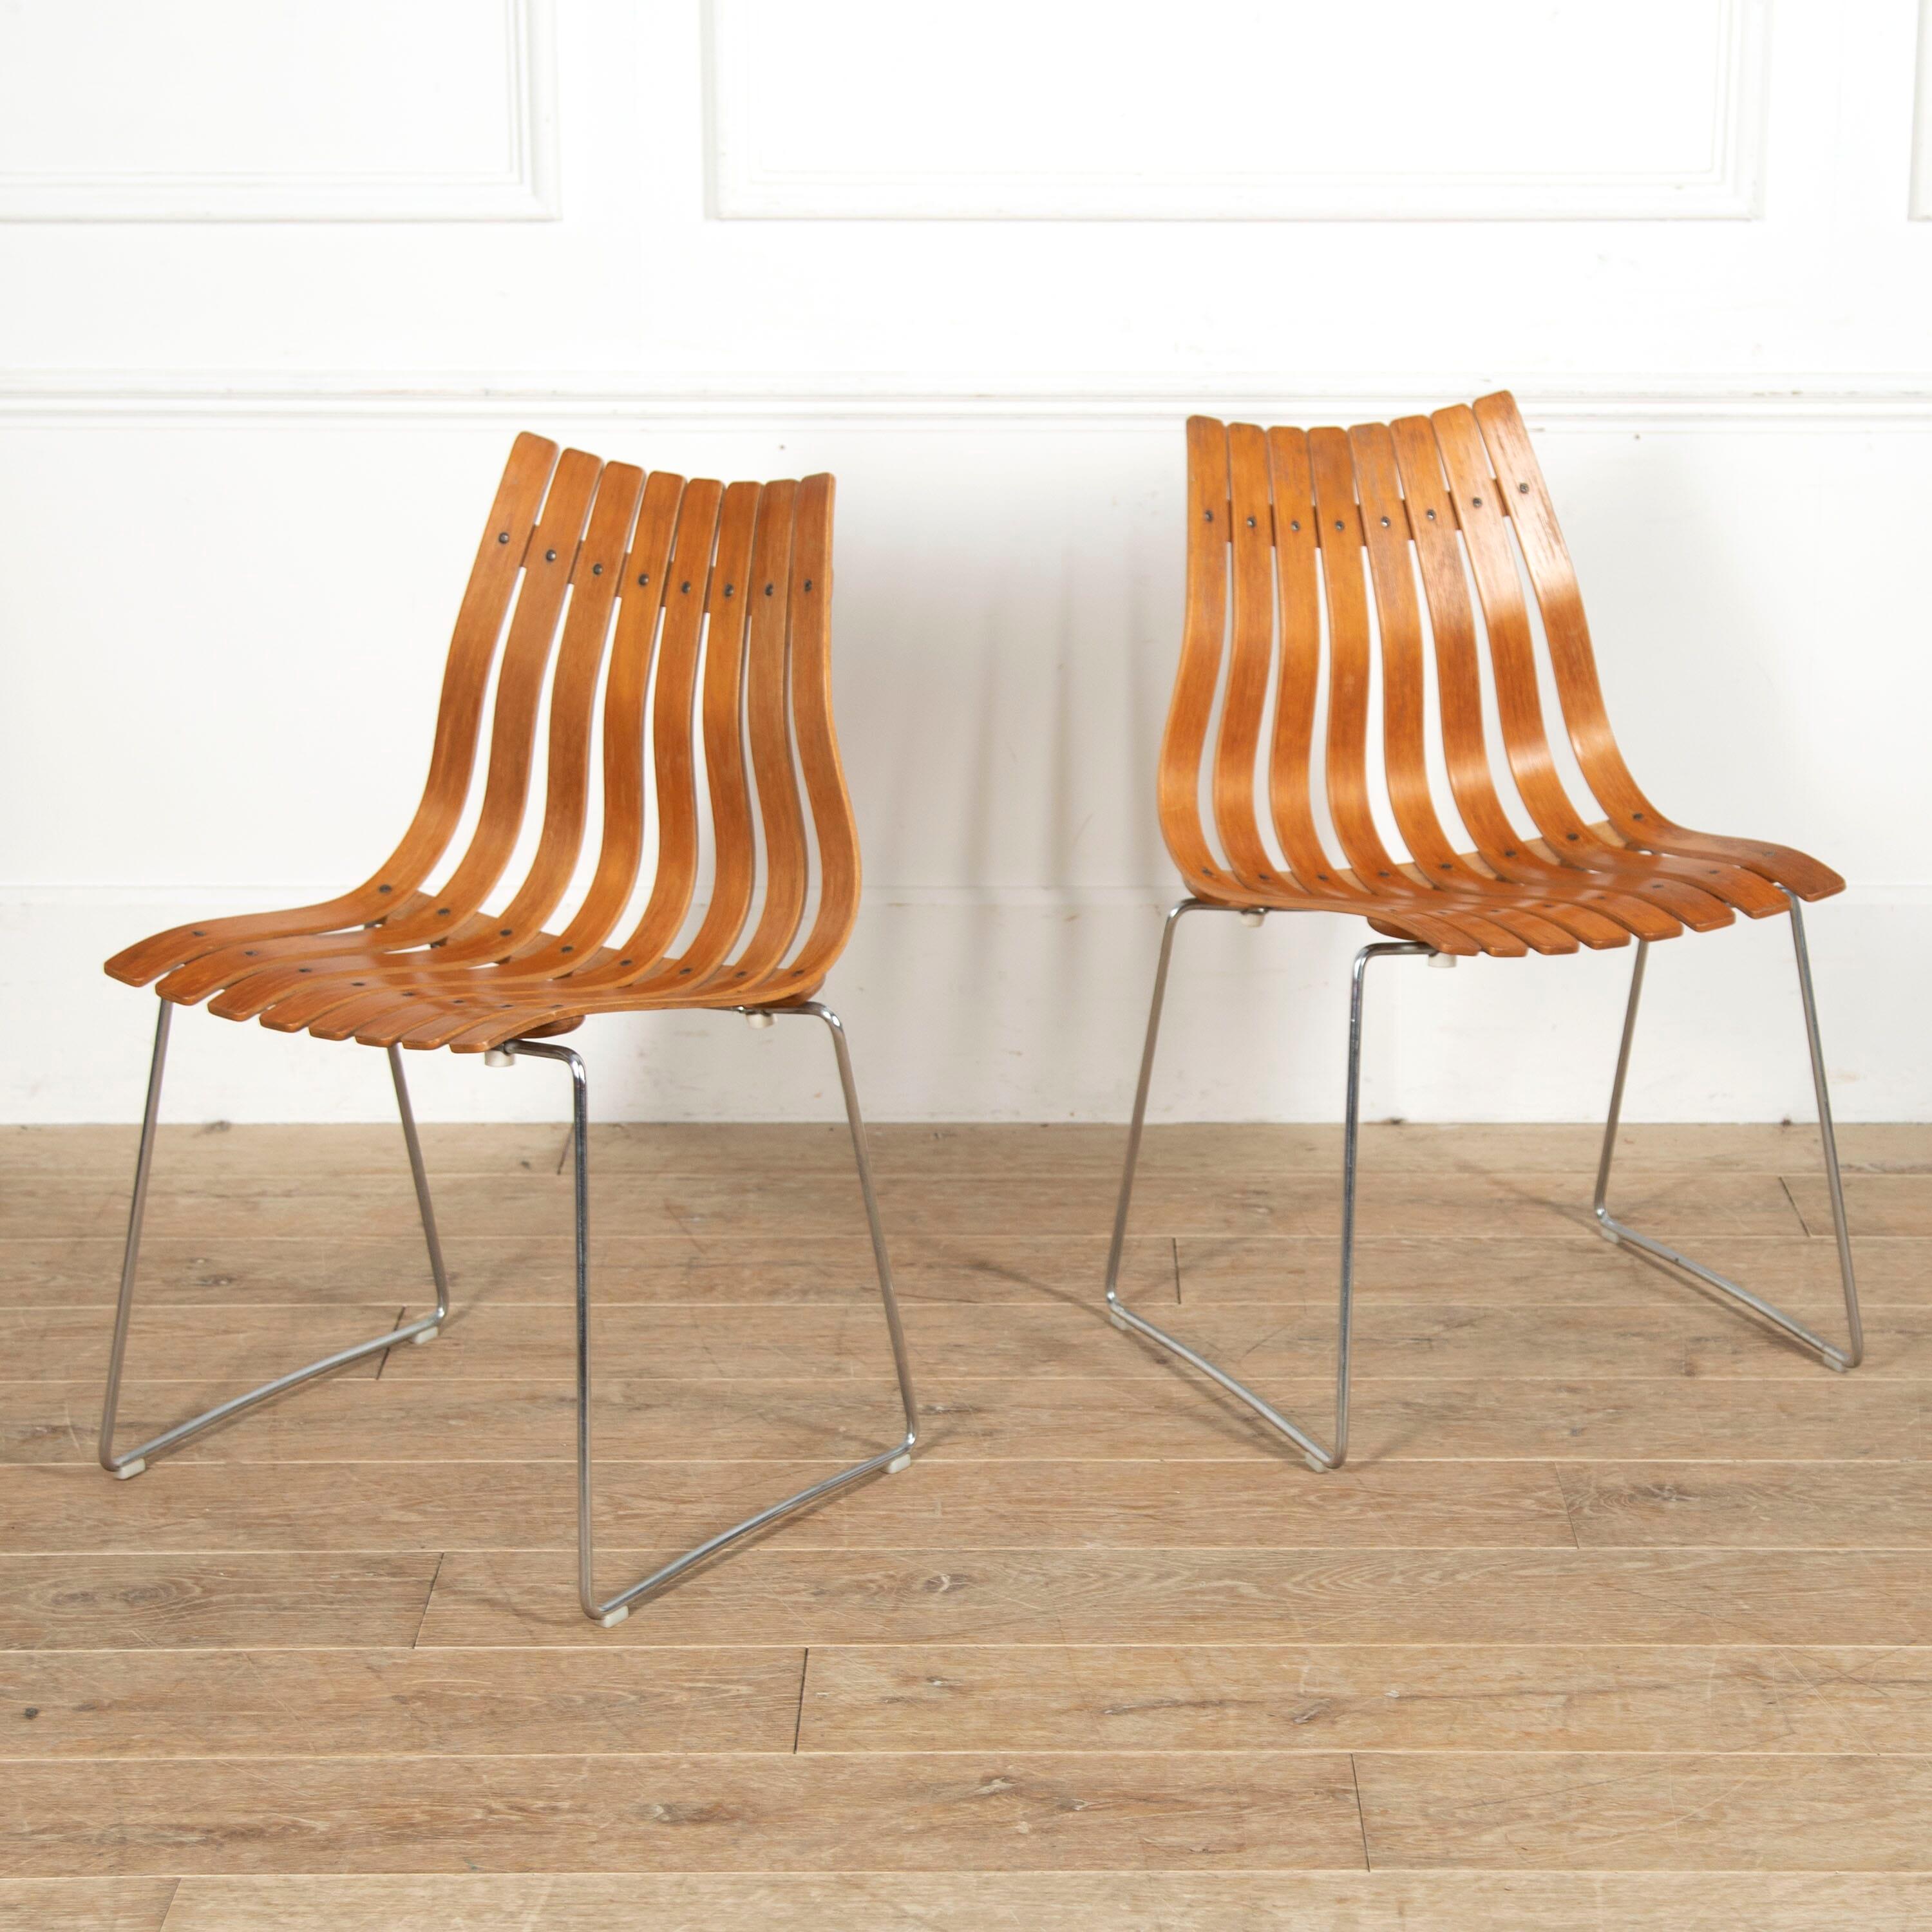 Stunning set of six 'Scandia' dining chairs, designed by Hans Brattrud in 1957 for Hove Møbler.

These iconic chairs with their broadening backs comprise laminated rosewood slats supported on a chrome frame.

Hans Brattrud was a Norweigan